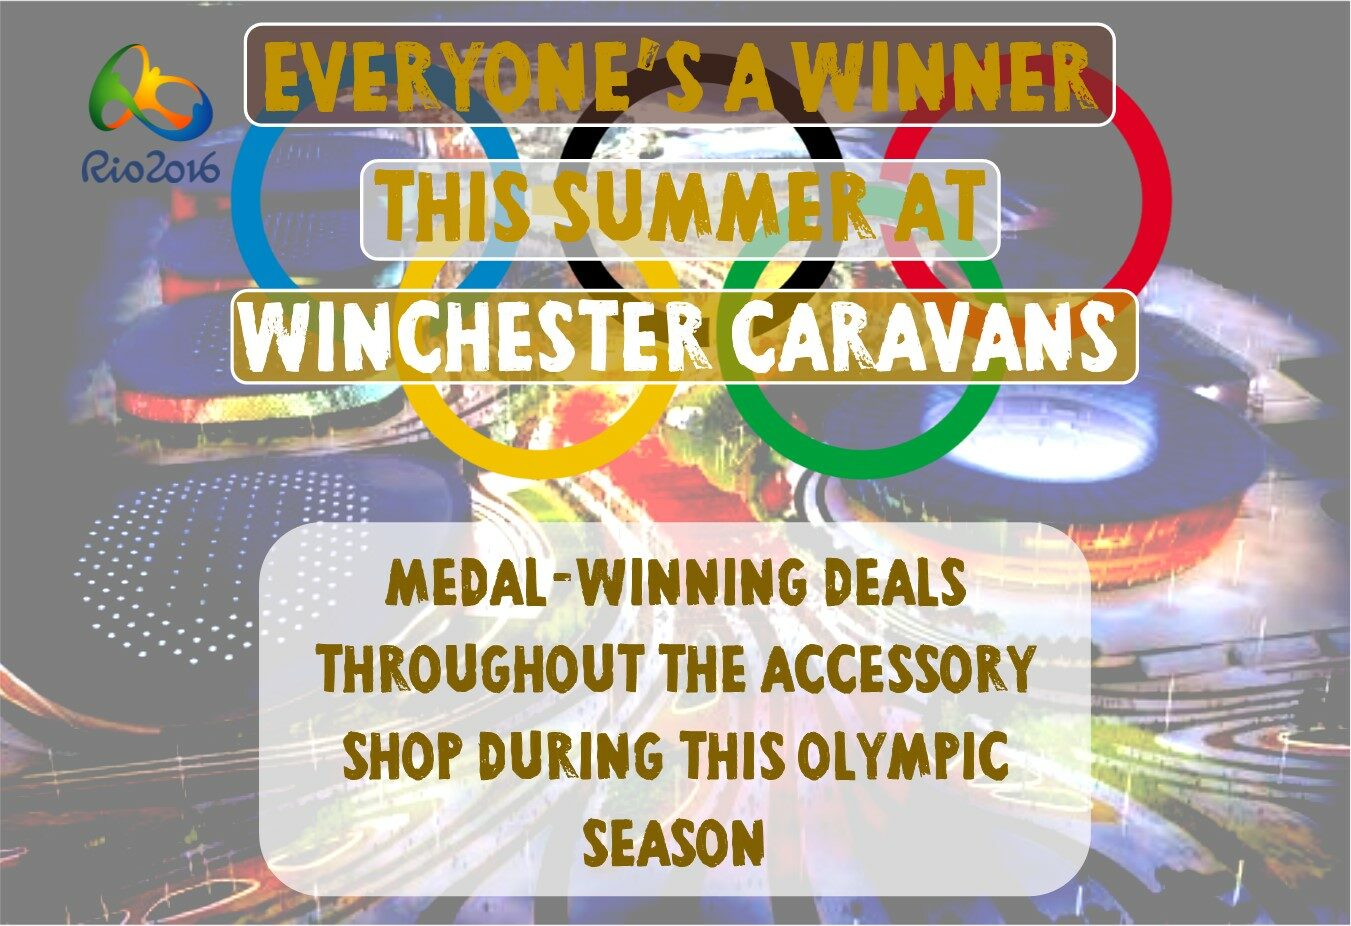 Everyone's a winner this summer at Winchester Caravans